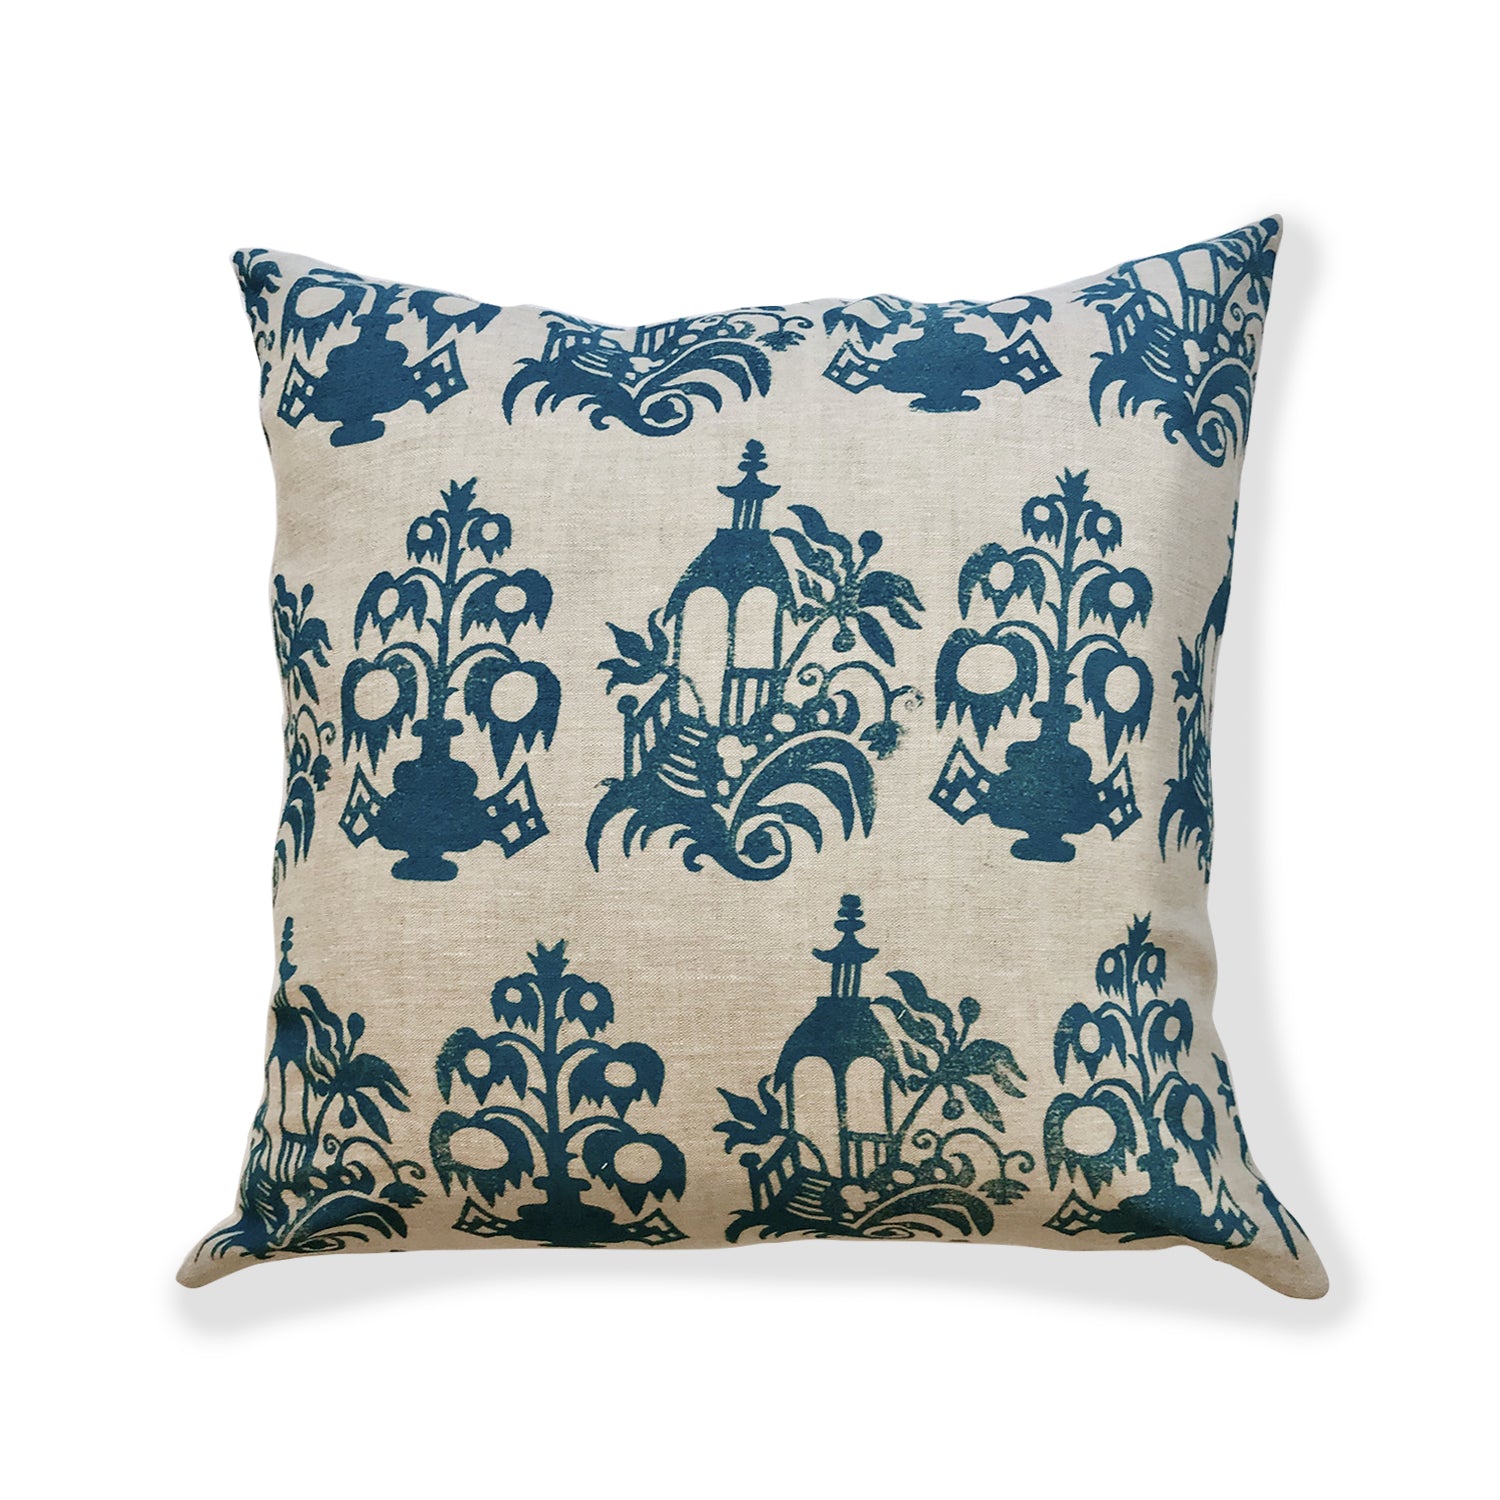 Square throw pillow with a repeating block print of florals and gazebos in navy on a tan field.